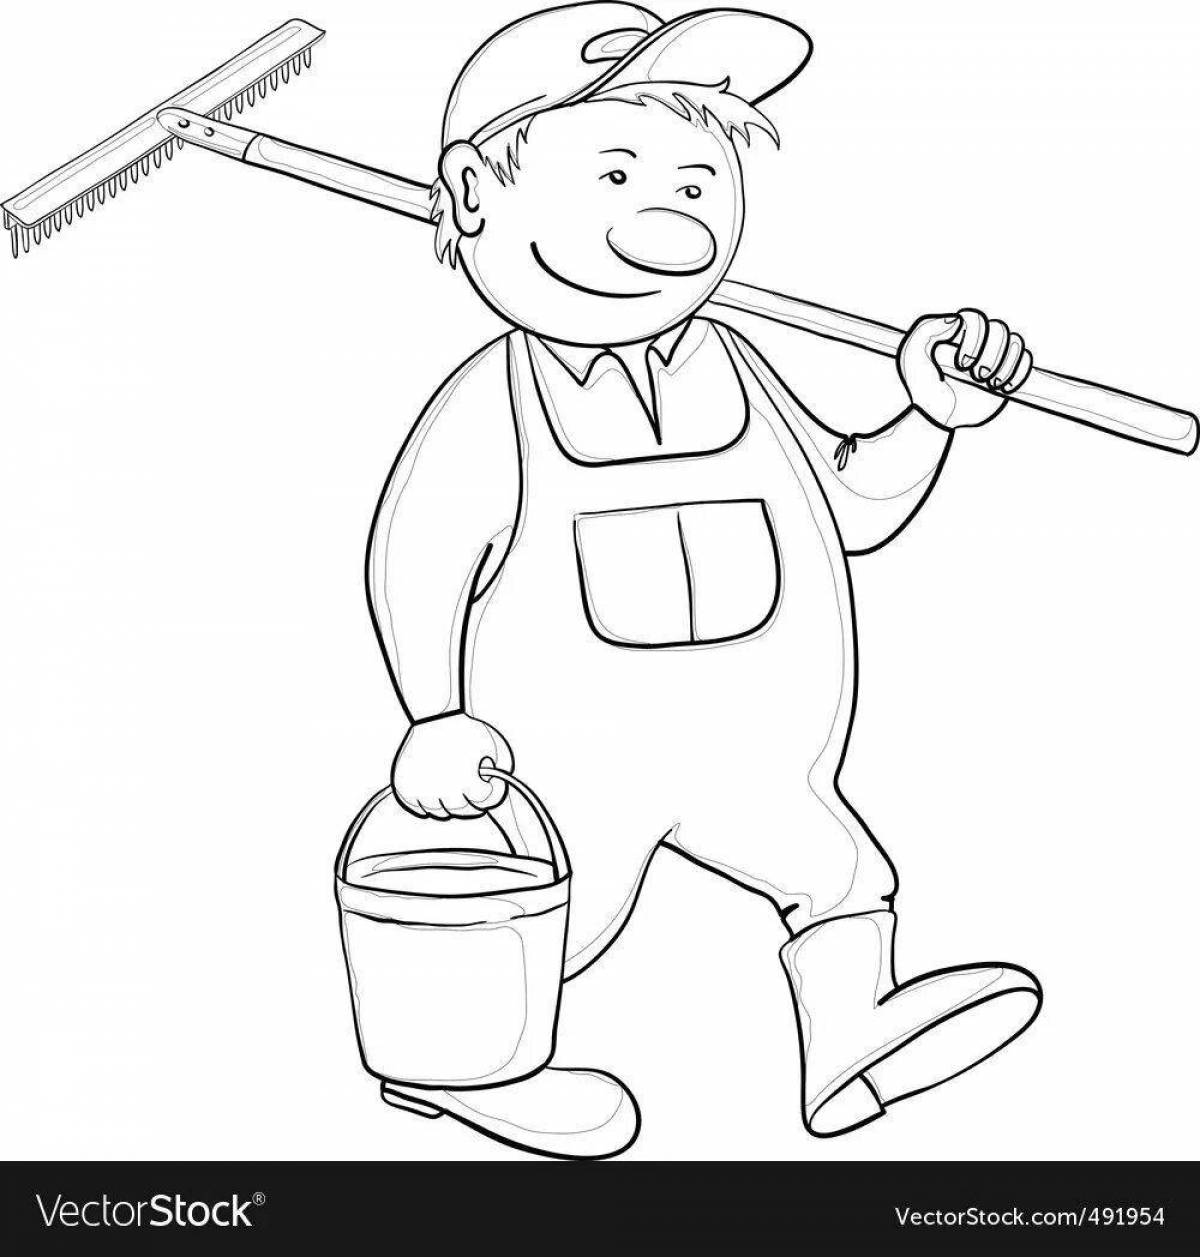 Playful gardener coloring page for kids